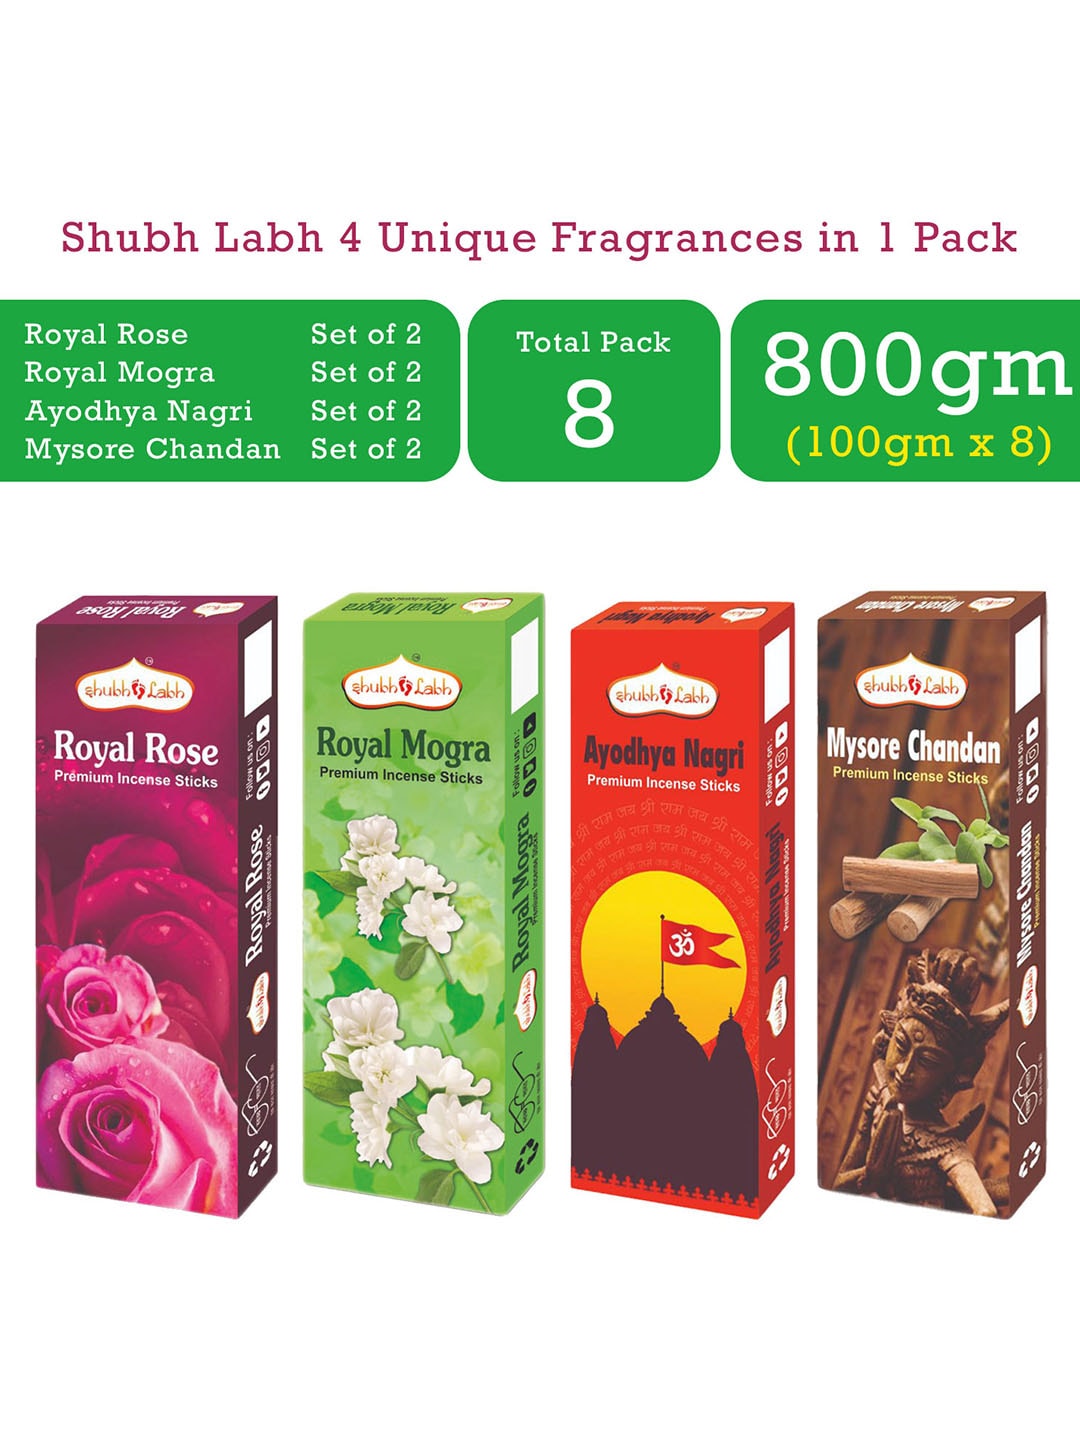 Shubh Labh Set of 8 Boxes Unique Fragrance Incense Sticks Price in India